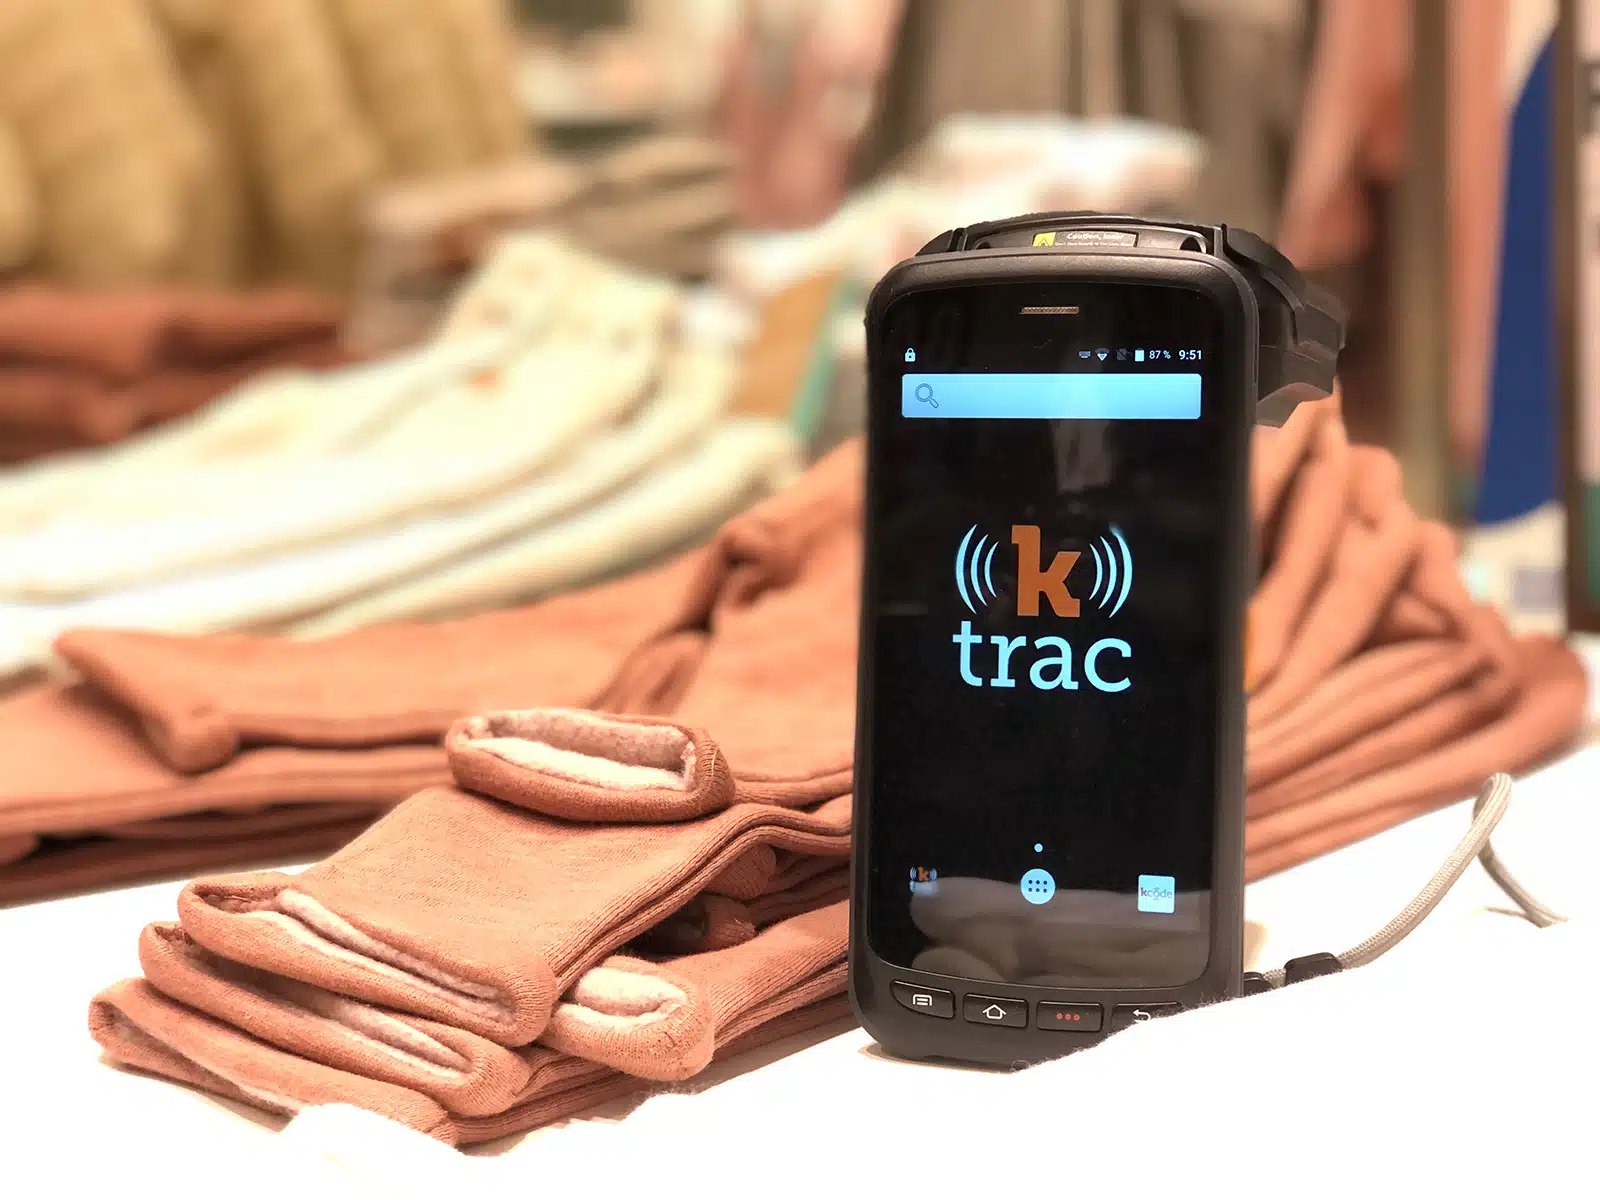 ktrac scanner sitting in front of folded clothing